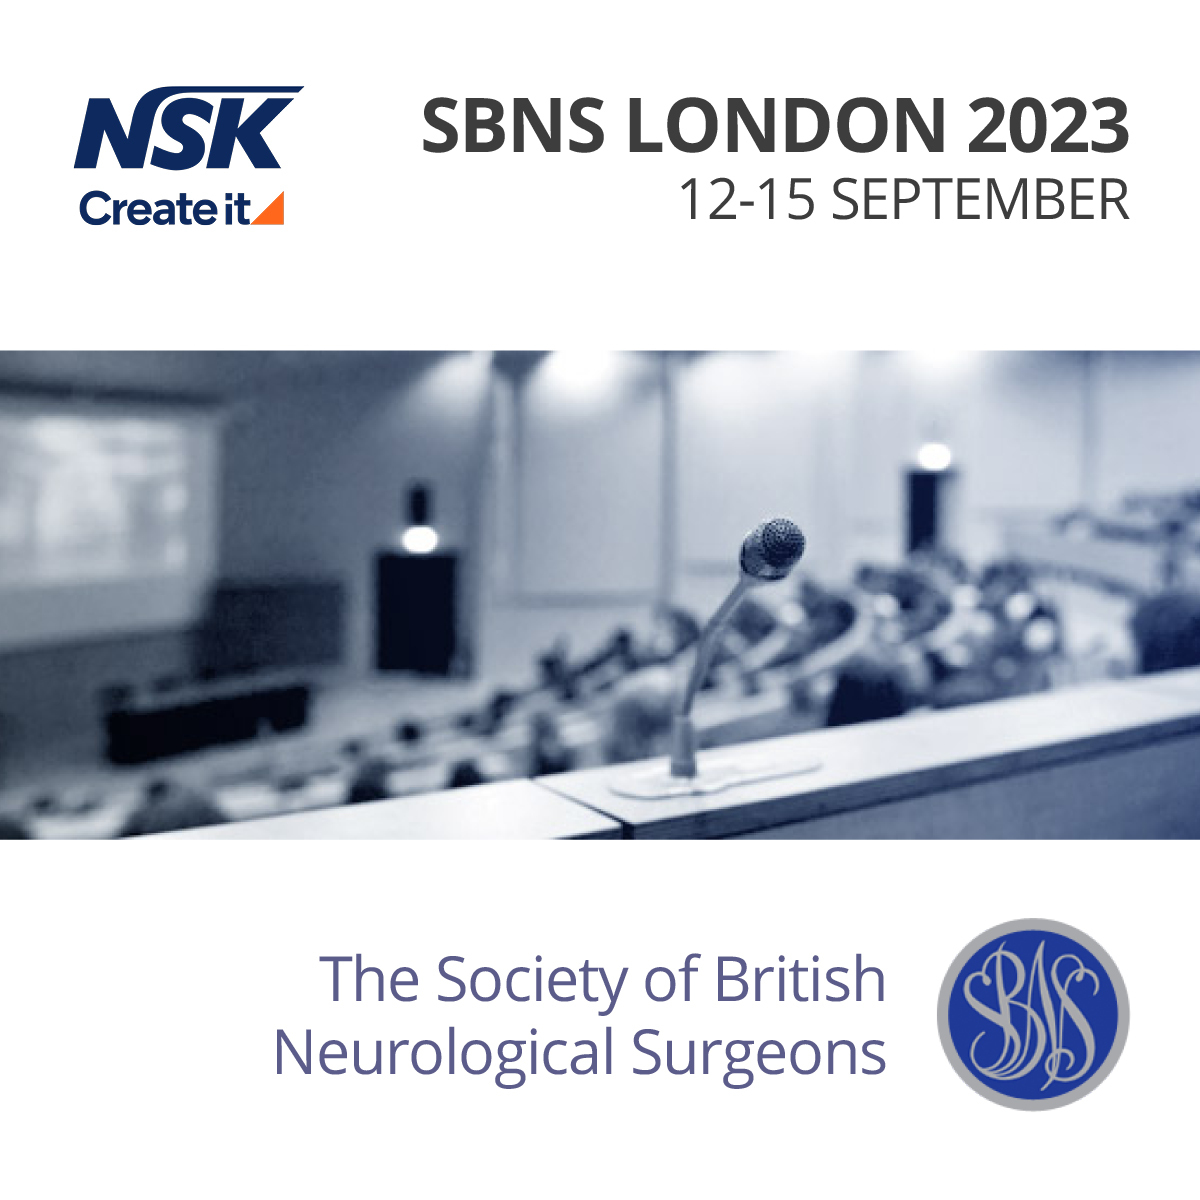 One week until SBNS London 2023 at Twickenham Conference & Event Centre. NSK will be on the Severn Health stand, so come and find out more about our range of precision surgical equipment. 

Book your place:
sbns.org.uk/index.php/conf… 

#SBNSLONDON2023 #neurosurgical